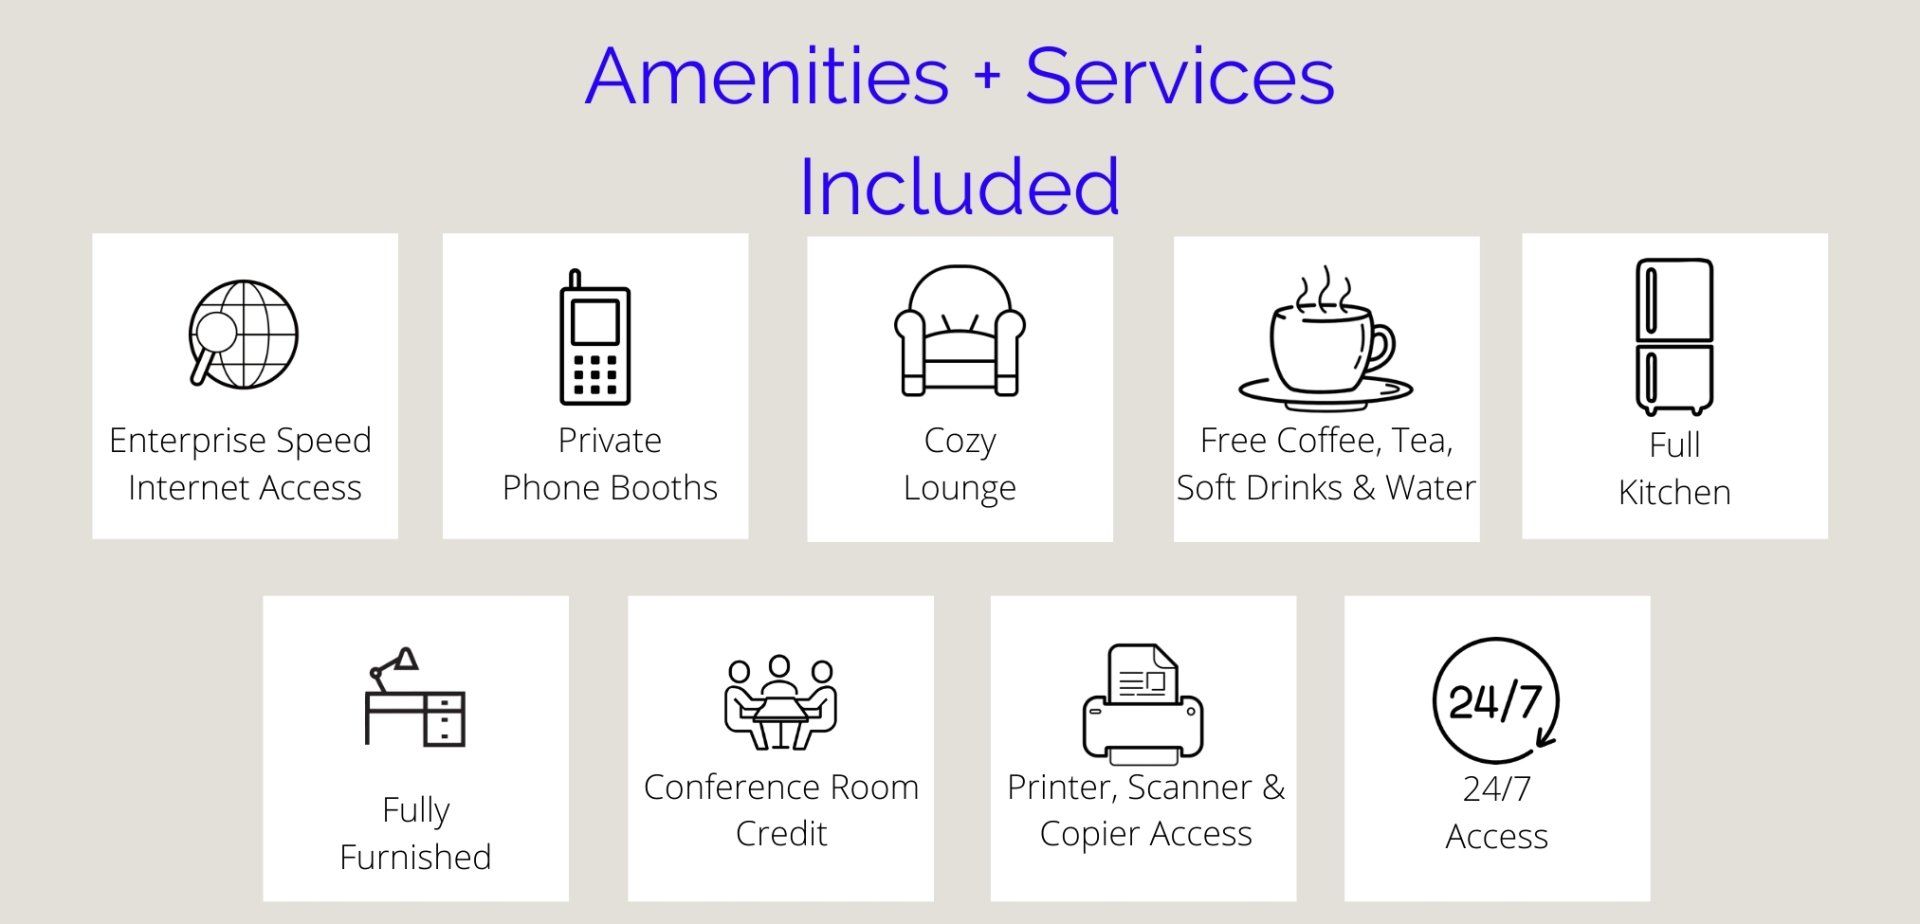 A list of amenities and services included in a hotel